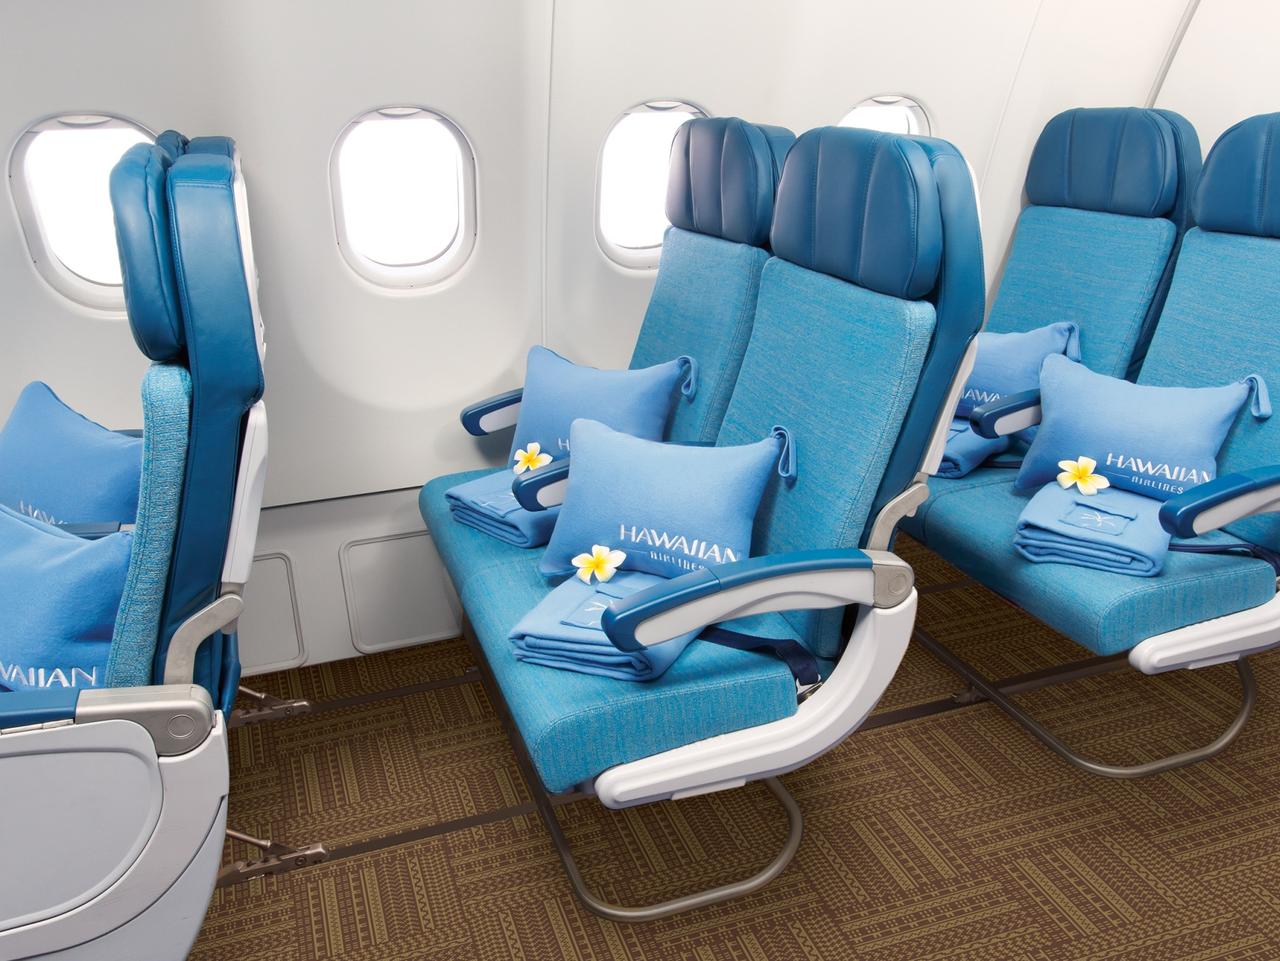 Hawaiian Airlines Extra Comfort Seating Offers More Leg Room